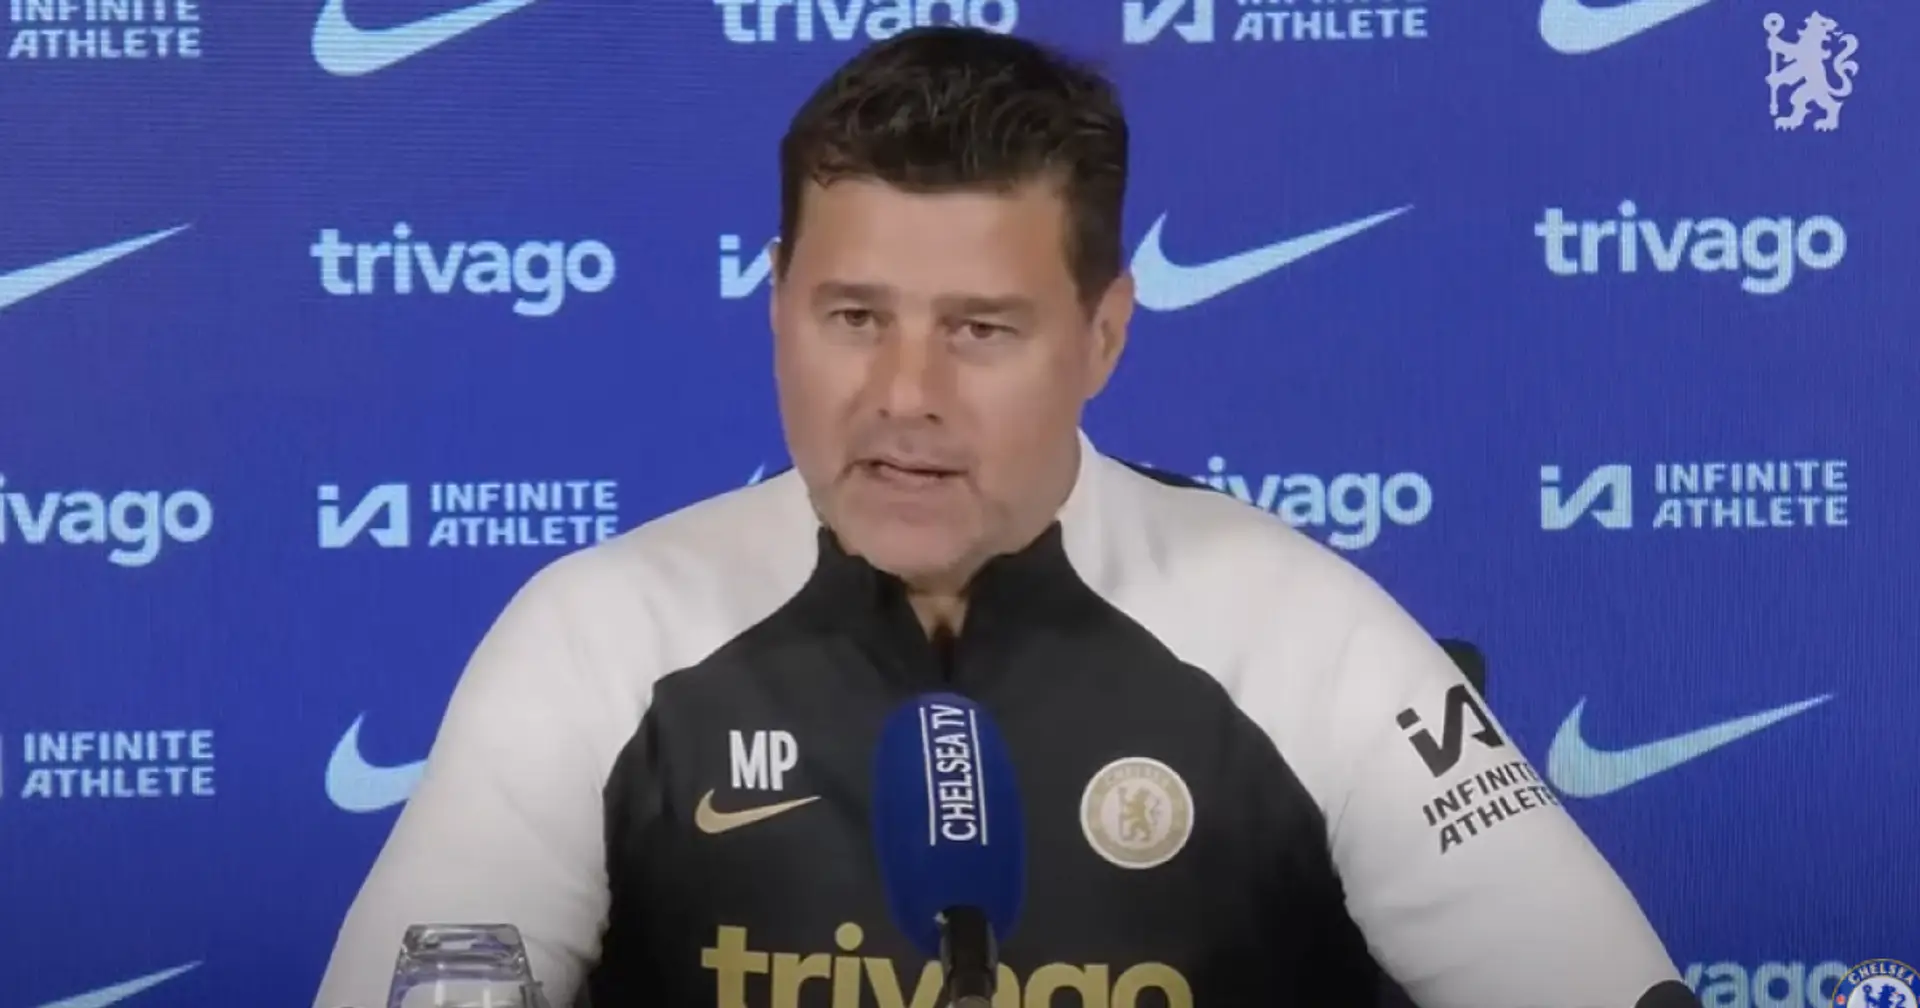 'It's about the process': Poch sends message to Chelsea fans